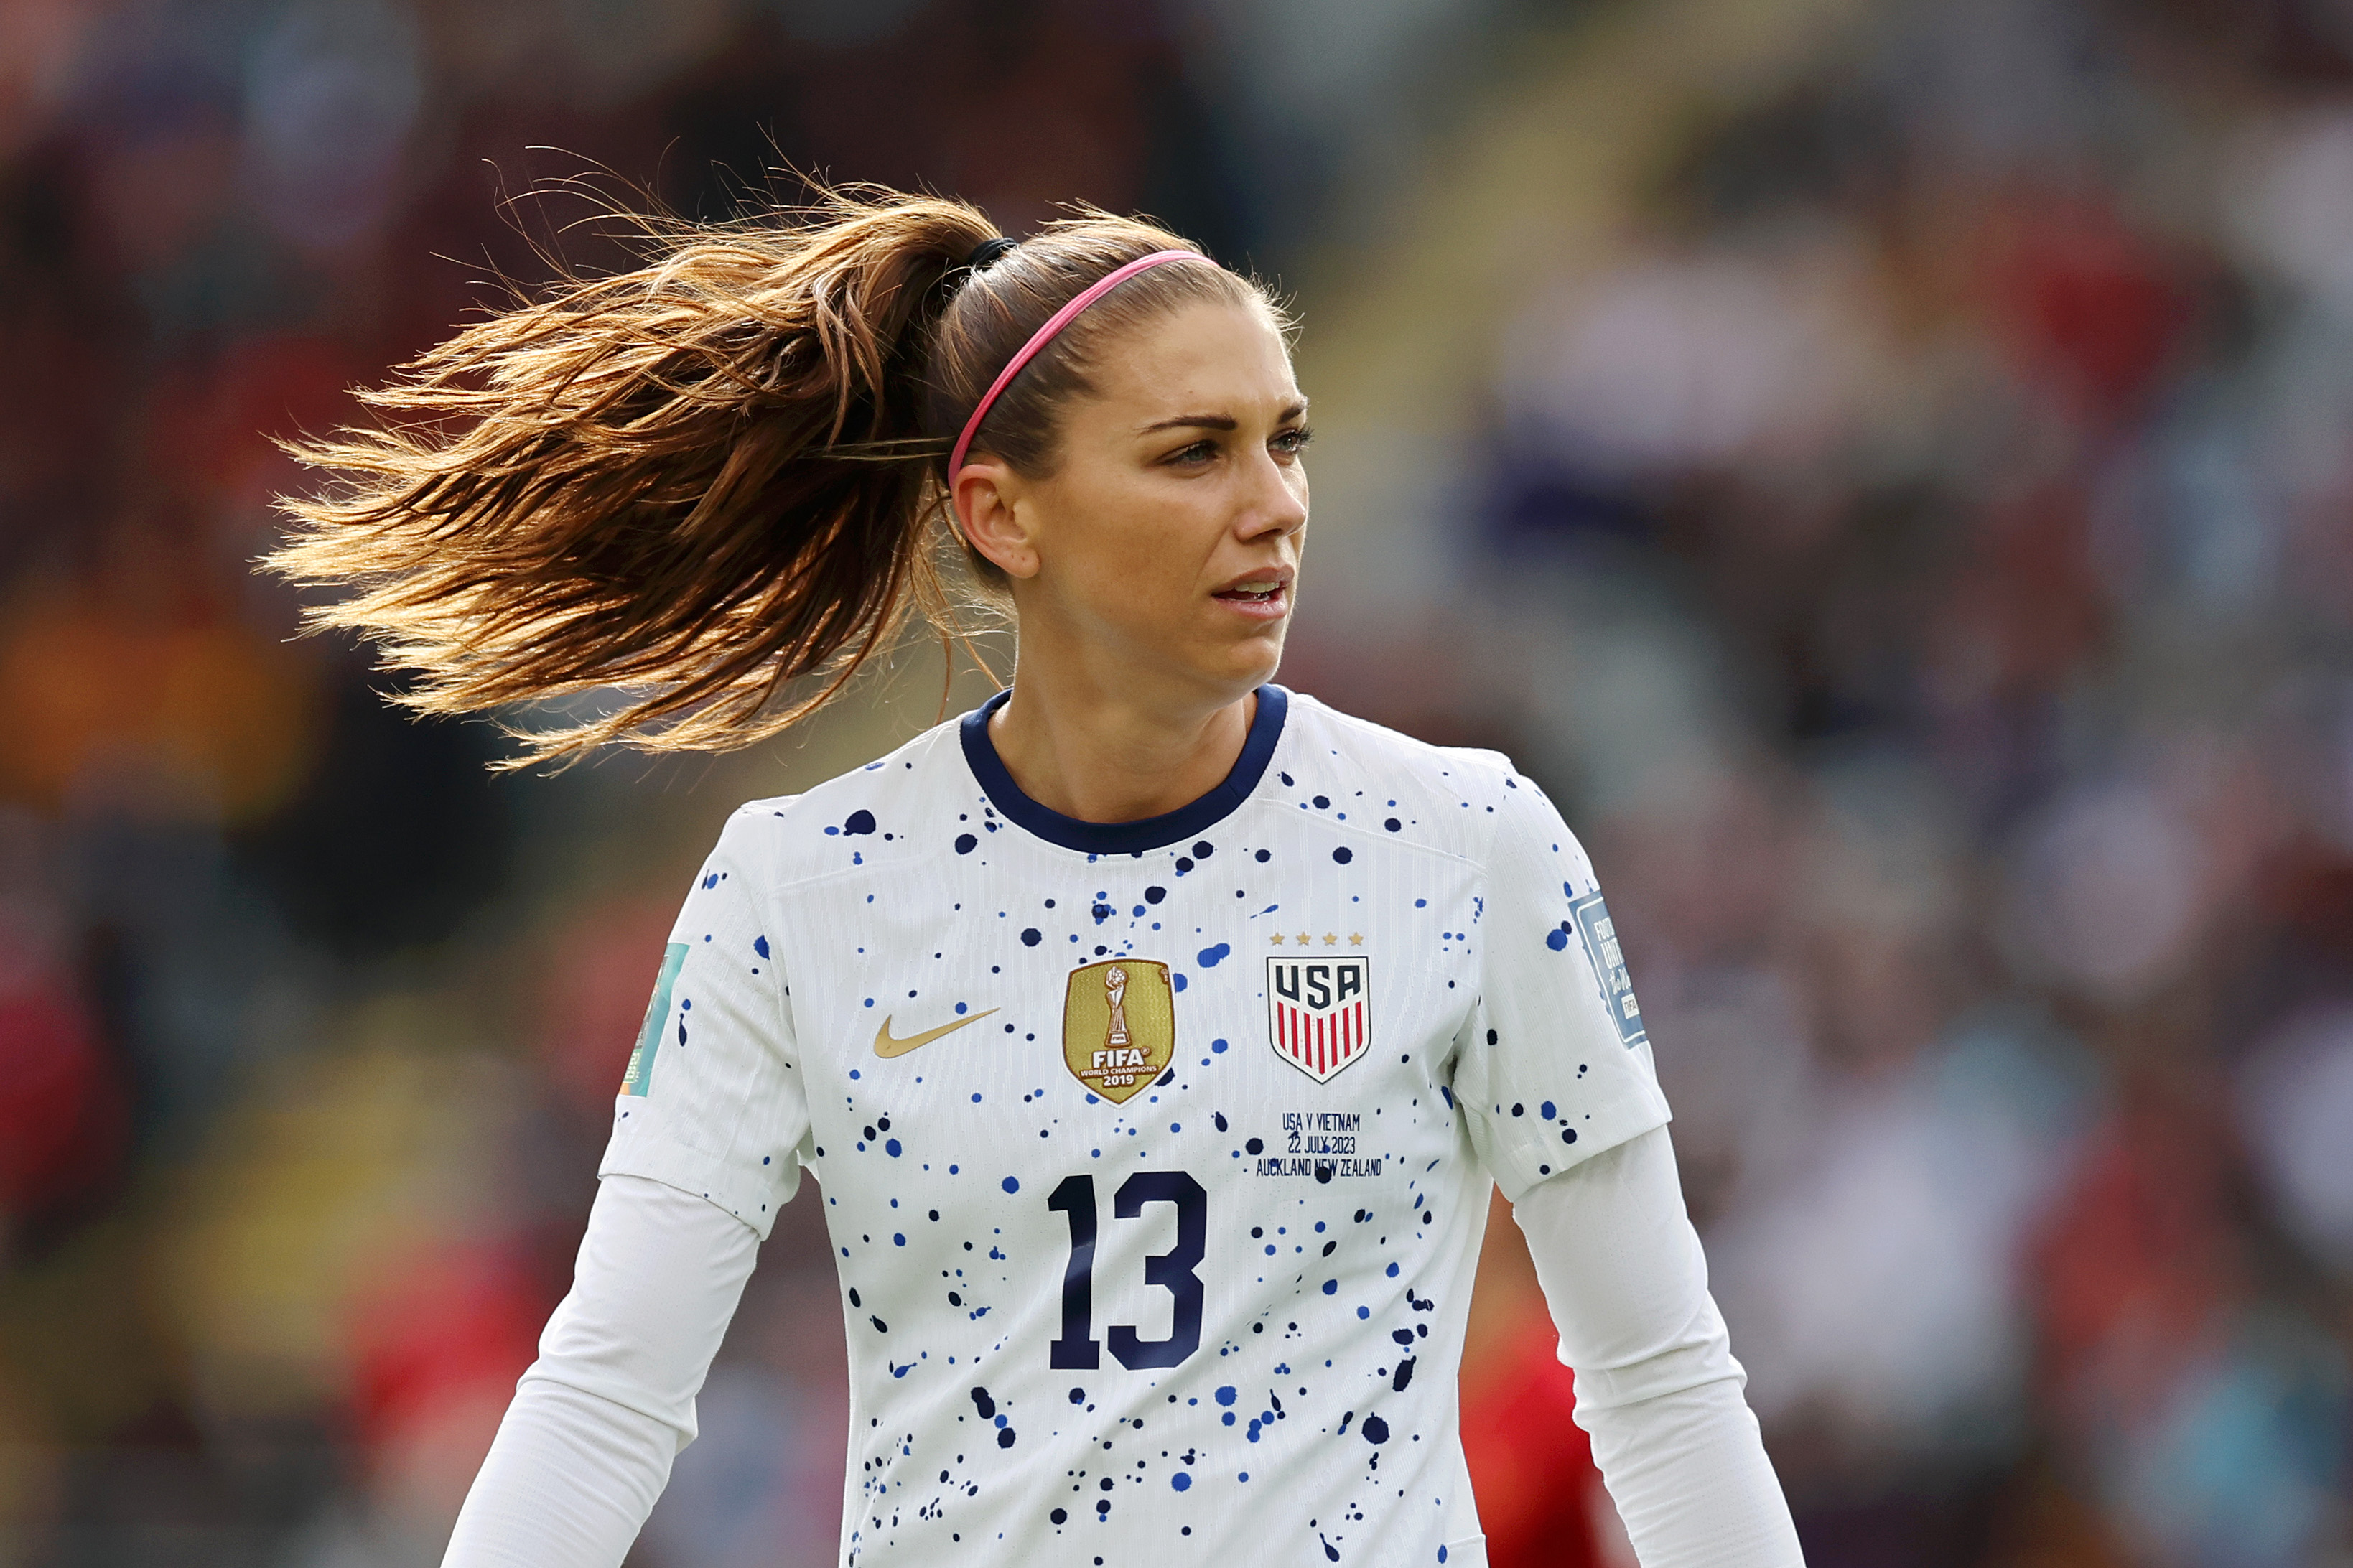 The Highest-Paid Players At The 2023 Women's World Cup